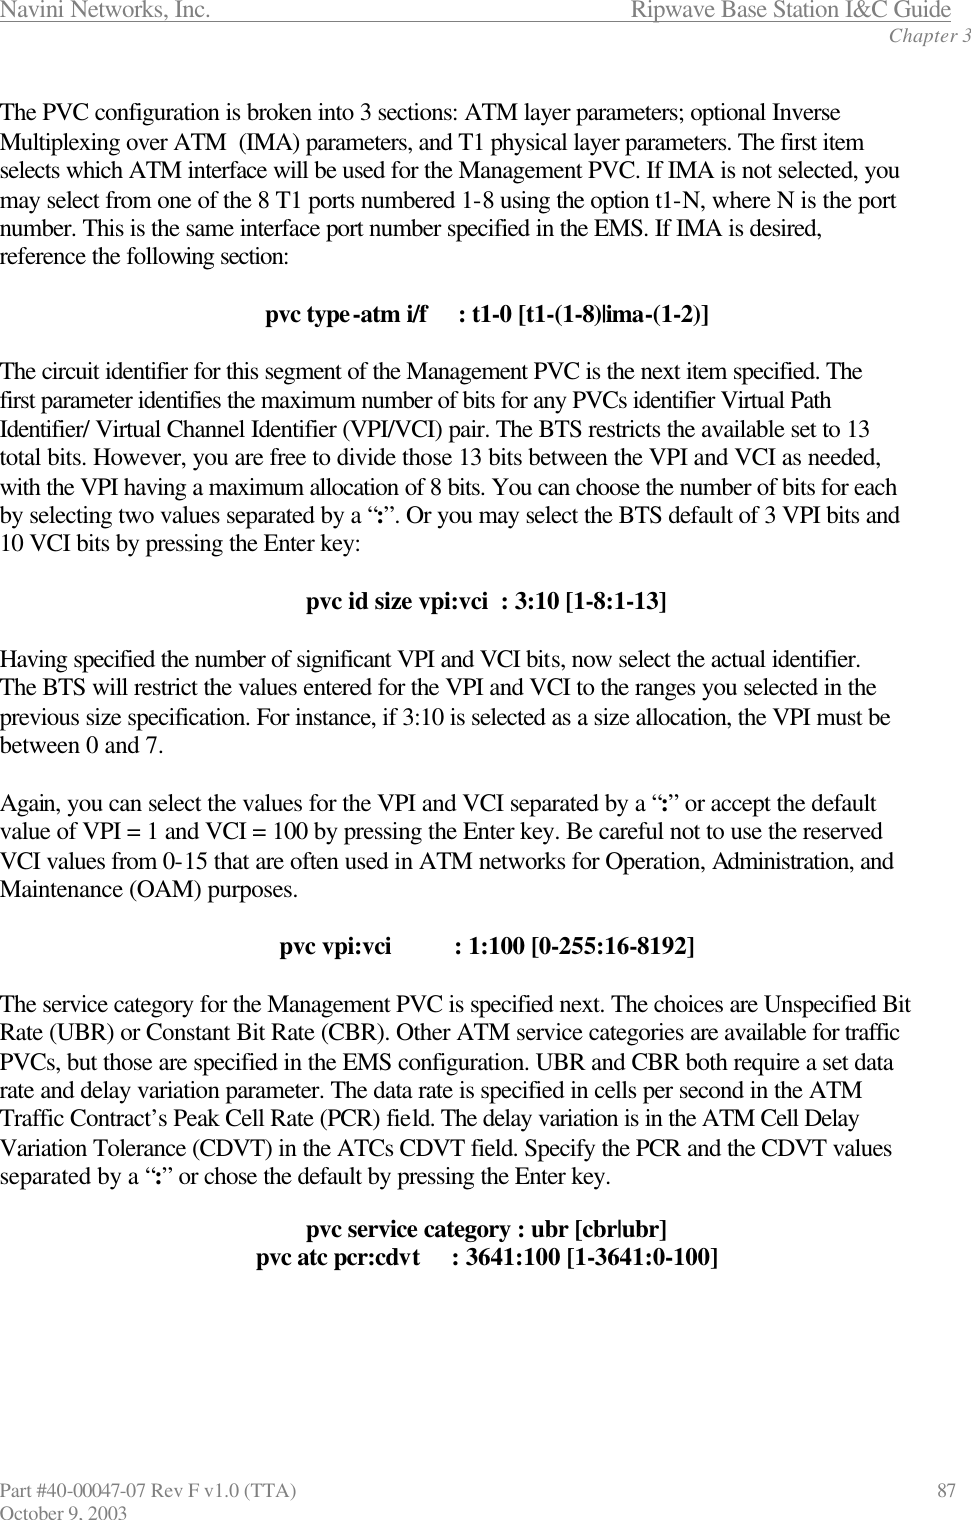 Navini Networks, Inc.                           Ripwave Base Station I&amp;C Guide Chapter 3 Part #40-00047-07 Rev F v1.0 (TTA)                             87 October 9, 2003  The PVC configuration is broken into 3 sections: ATM layer parameters; optional Inverse Multiplexing over ATM  (IMA) parameters, and T1 physical layer parameters. The first item selects which ATM interface will be used for the Management PVC. If IMA is not selected, you may select from one of the 8 T1 ports numbered 1-8 using the option t1-N, where N is the port number. This is the same interface port number specified in the EMS. If IMA is desired, reference the following section:  pvc type-atm i/f     : t1-0 [t1-(1-8)|ima-(1-2)]  The circuit identifier for this segment of the Management PVC is the next item specified. The first parameter identifies the maximum number of bits for any PVCs identifier Virtual Path Identifier/ Virtual Channel Identifier (VPI/VCI) pair. The BTS restricts the available set to 13 total bits. However, you are free to divide those 13 bits between the VPI and VCI as needed, with the VPI having a maximum allocation of 8 bits. You can choose the number of bits for each by selecting two values separated by a “:”. Or you may select the BTS default of 3 VPI bits and 10 VCI bits by pressing the Enter key:  pvc id size vpi:vci  : 3:10 [1-8:1-13]  Having specified the number of significant VPI and VCI bits, now select the actual identifier. The BTS will restrict the values entered for the VPI and VCI to the ranges you selected in the previous size specification. For instance, if 3:10 is selected as a size allocation, the VPI must be between 0 and 7.   Again, you can select the values for the VPI and VCI separated by a “:” or accept the default value of VPI = 1 and VCI = 100 by pressing the Enter key. Be careful not to use the reserved VCI values from 0-15 that are often used in ATM networks for Operation, Administration, and Maintenance (OAM) purposes.  pvc vpi:vci          : 1:100 [0-255:16-8192]  The service category for the Management PVC is specified next. The choices are Unspecified Bit Rate (UBR) or Constant Bit Rate (CBR). Other ATM service categories are available for traffic PVCs, but those are specified in the EMS configuration. UBR and CBR both require a set data rate and delay variation parameter. The data rate is specified in cells per second in the ATM Traffic Contract’s Peak Cell Rate (PCR) field. The delay variation is in the ATM Cell Delay Variation Tolerance (CDVT) in the ATCs CDVT field. Specify the PCR and the CDVT values separated by a “:” or chose the default by pressing the Enter key.  pvc service category : ubr [cbr|ubr] pvc atc pcr:cdvt     : 3641:100 [1-3641:0-100]      